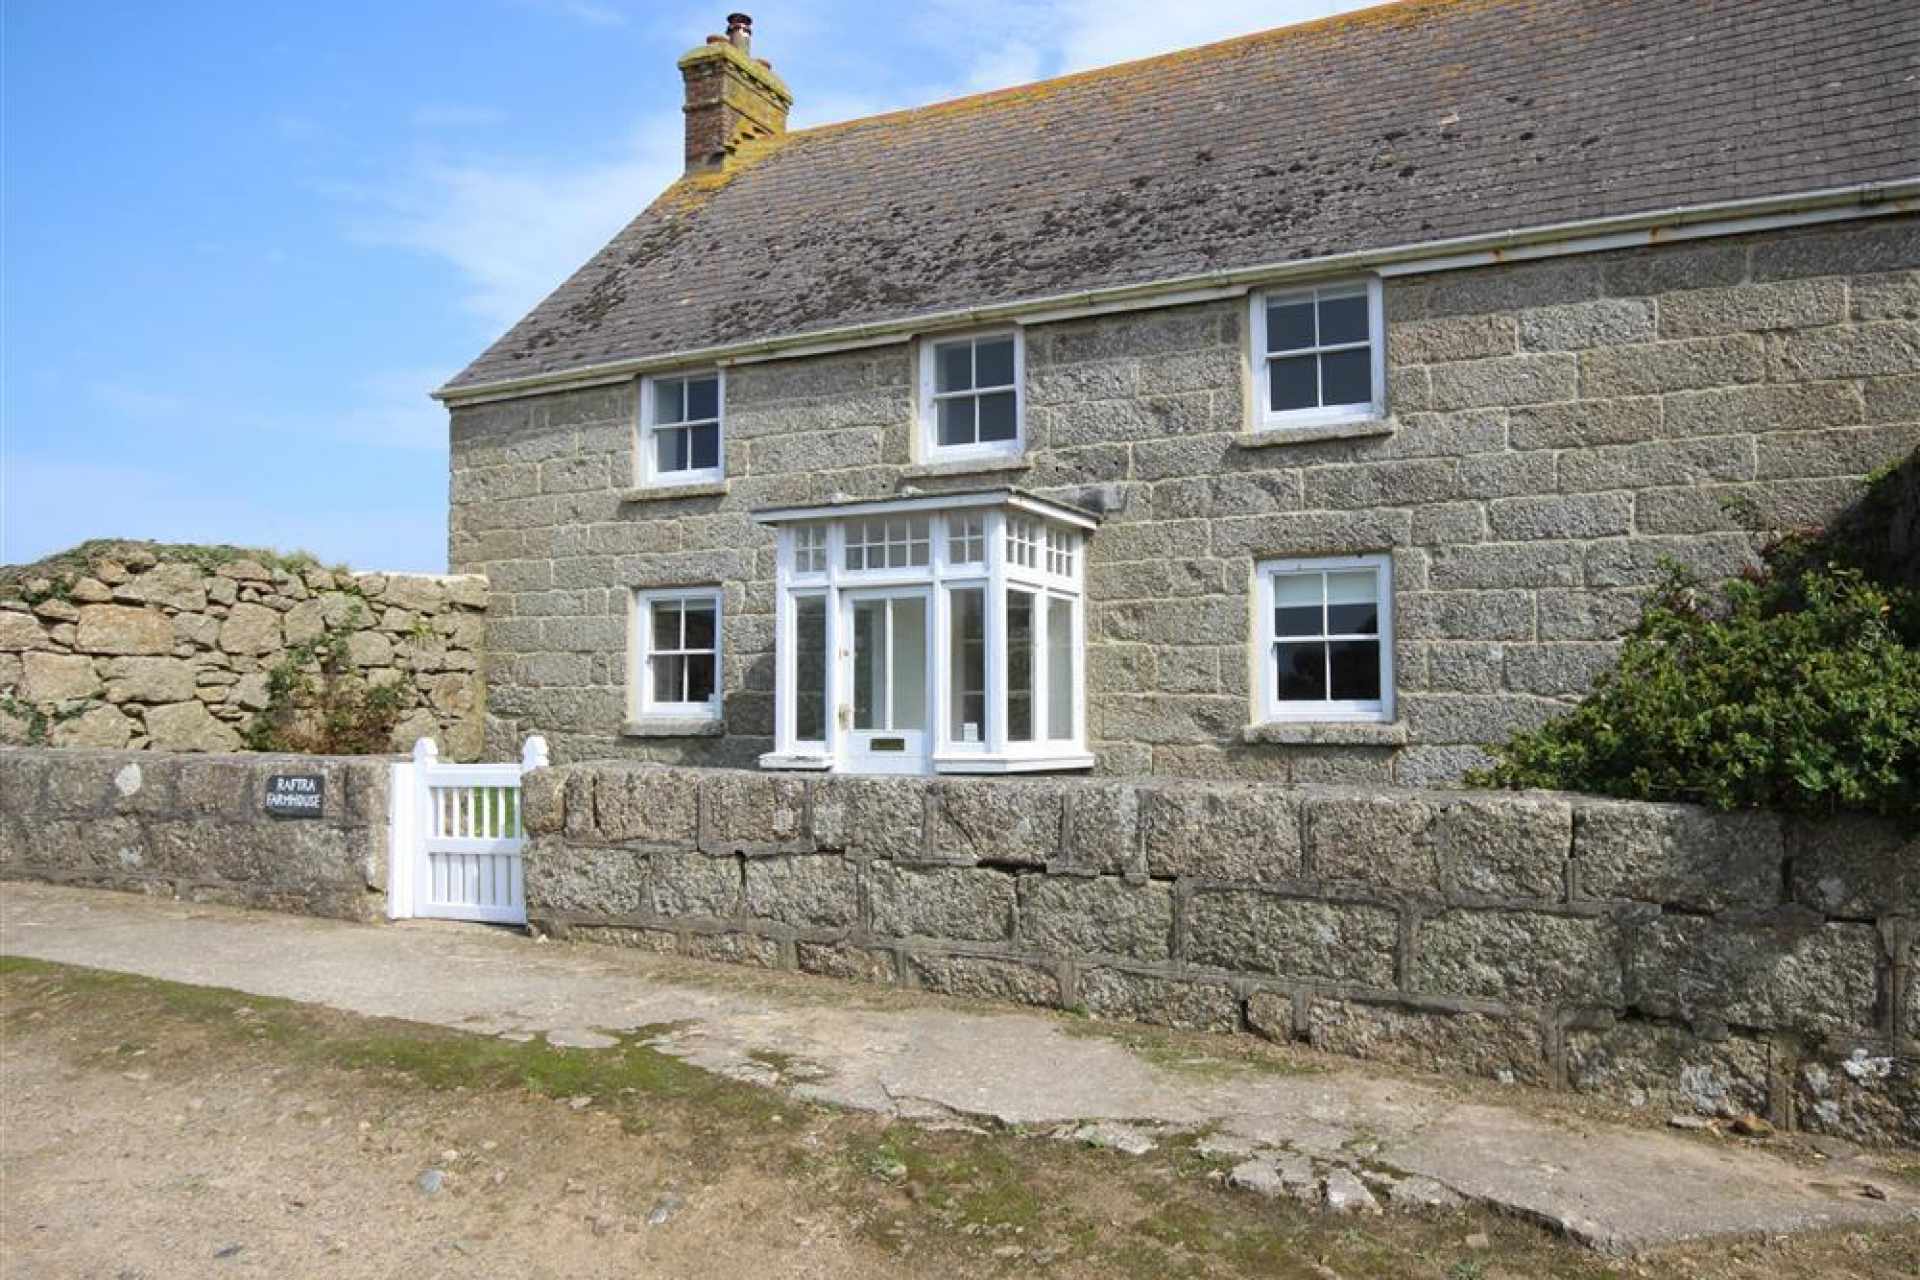 Raftra Farmhouse in Porthcurno sleeps 8-12 guests and is available for your holiday